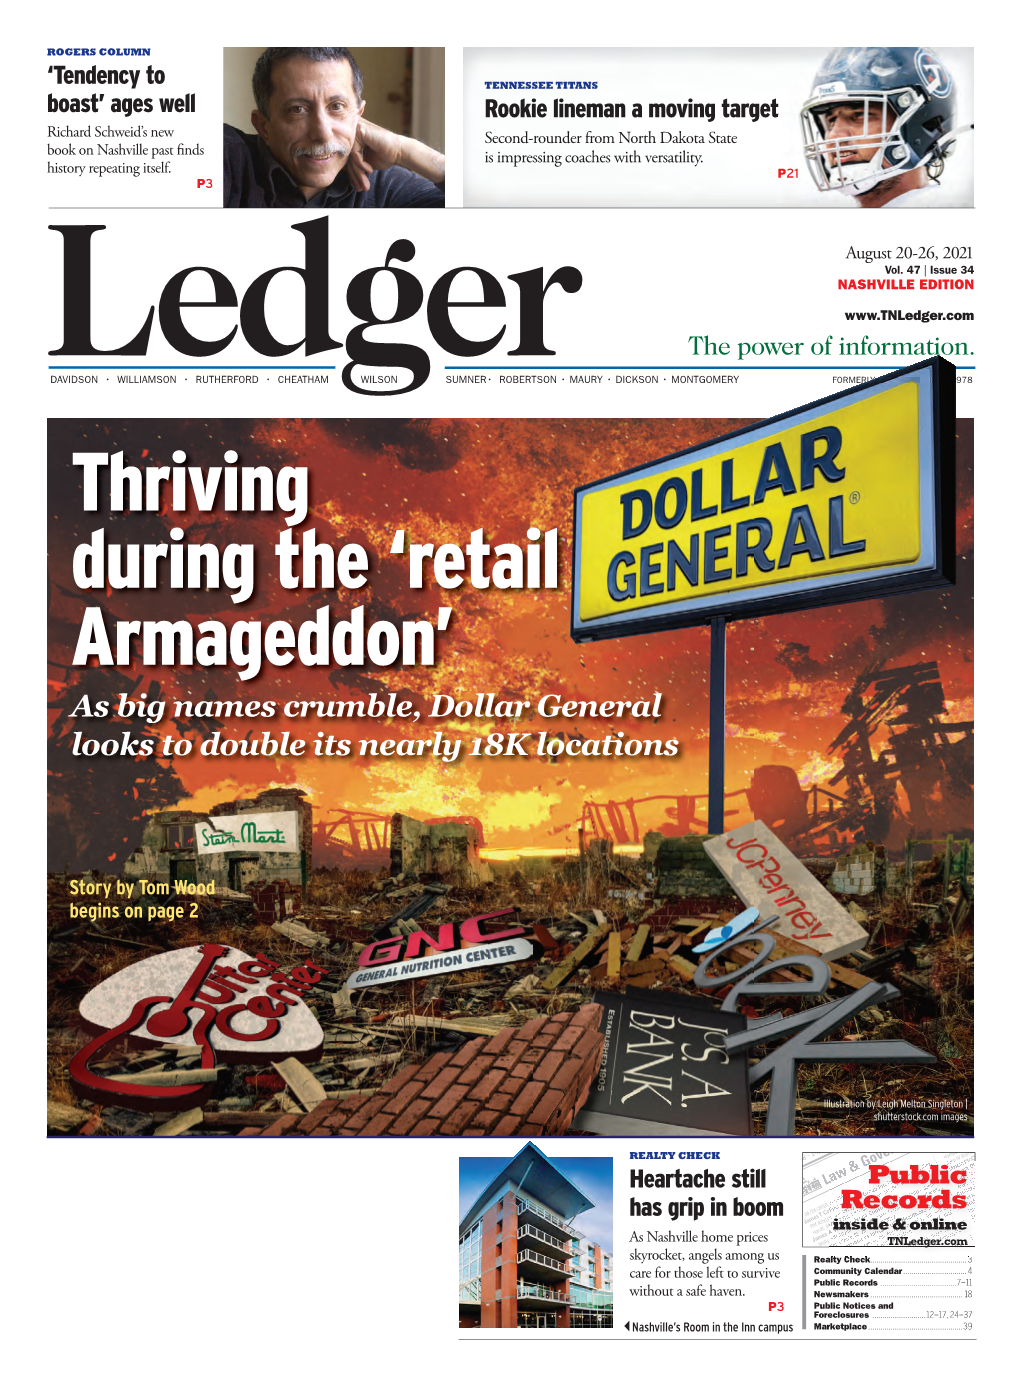 Retail Armageddon’ As Big Names Crumble, Dollar General Looks to Double Its Nearly 18K Locations